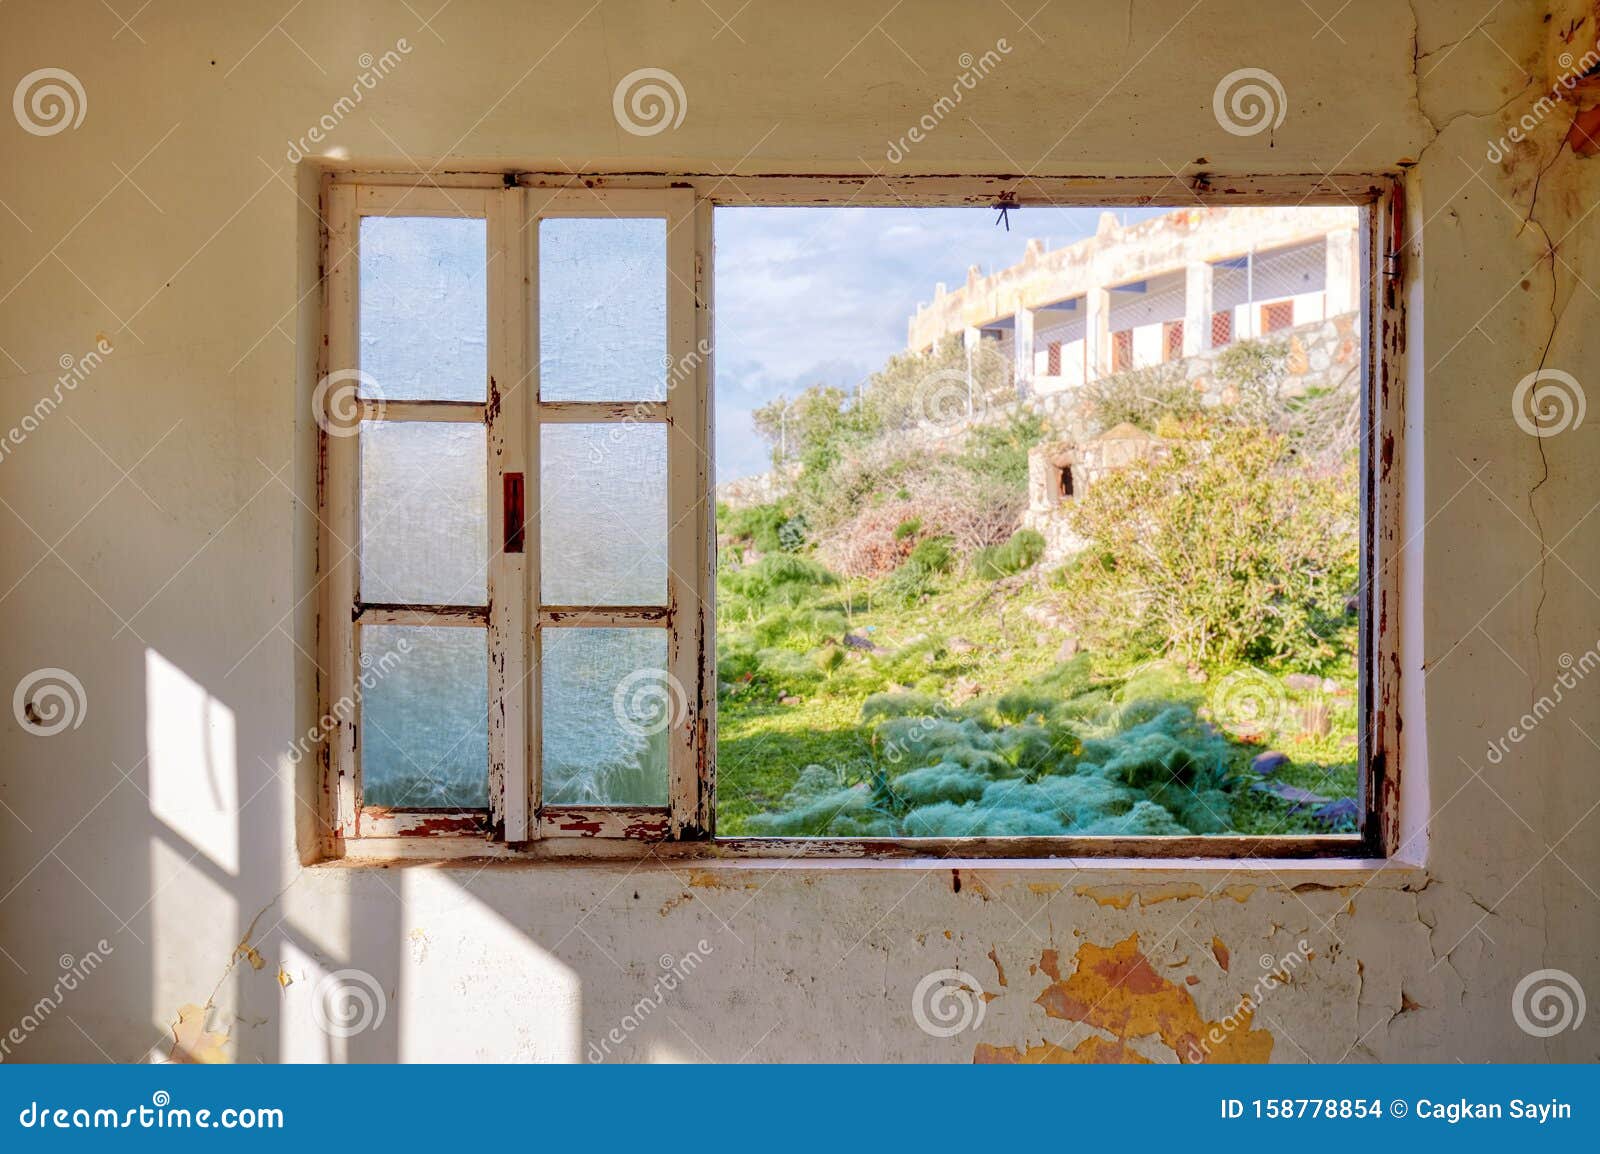 interior of a desolated house and a window frame with broken glass